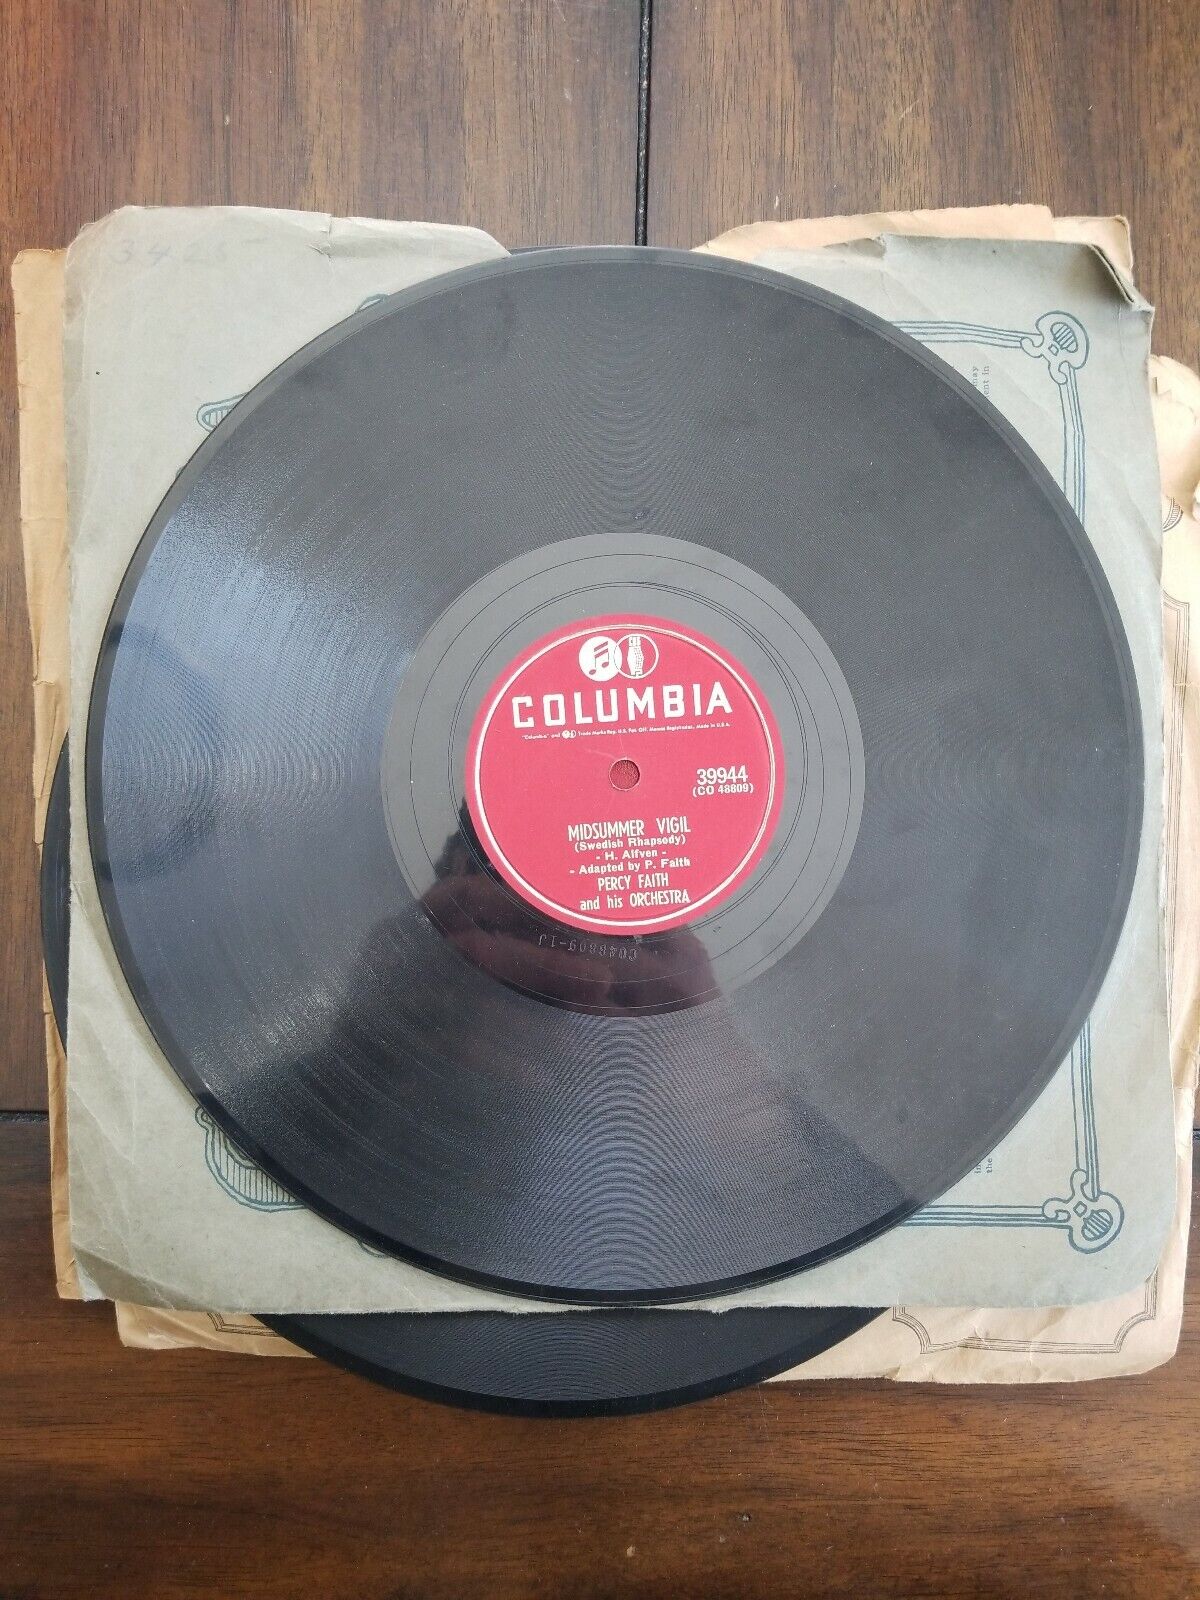 vintage 78 RPM shellac record Columbia 39944 Percy Faith Moulin Rouge/Misummer 